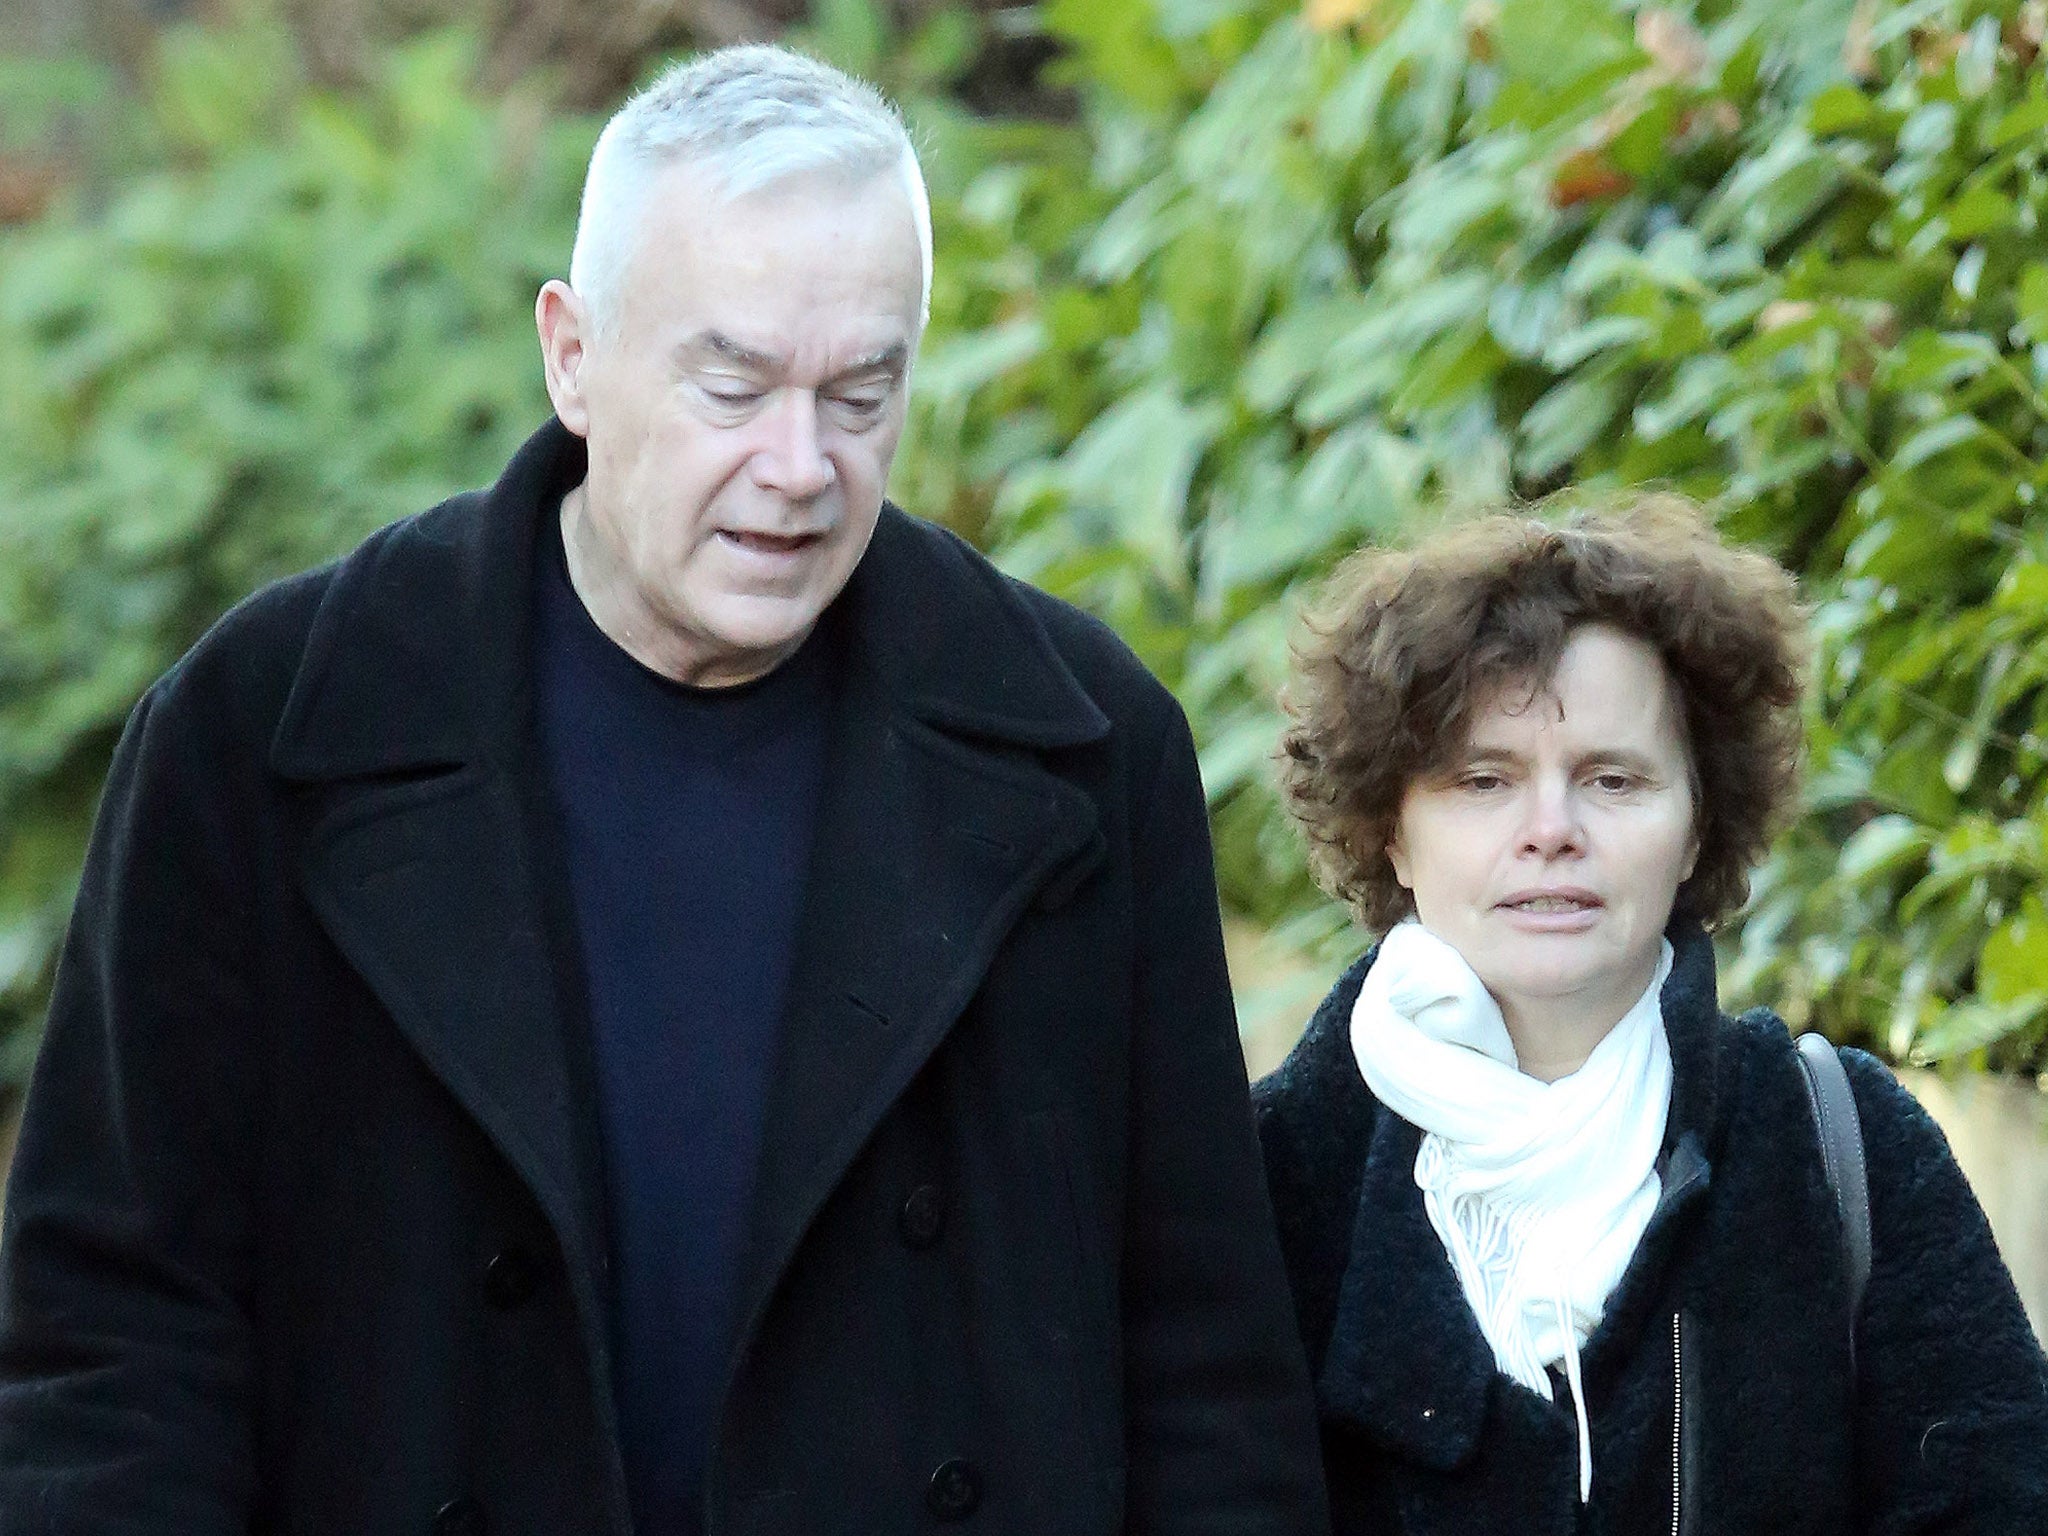 Huw Edwards in hospital as he is named in BBC sex scandal The Independent image